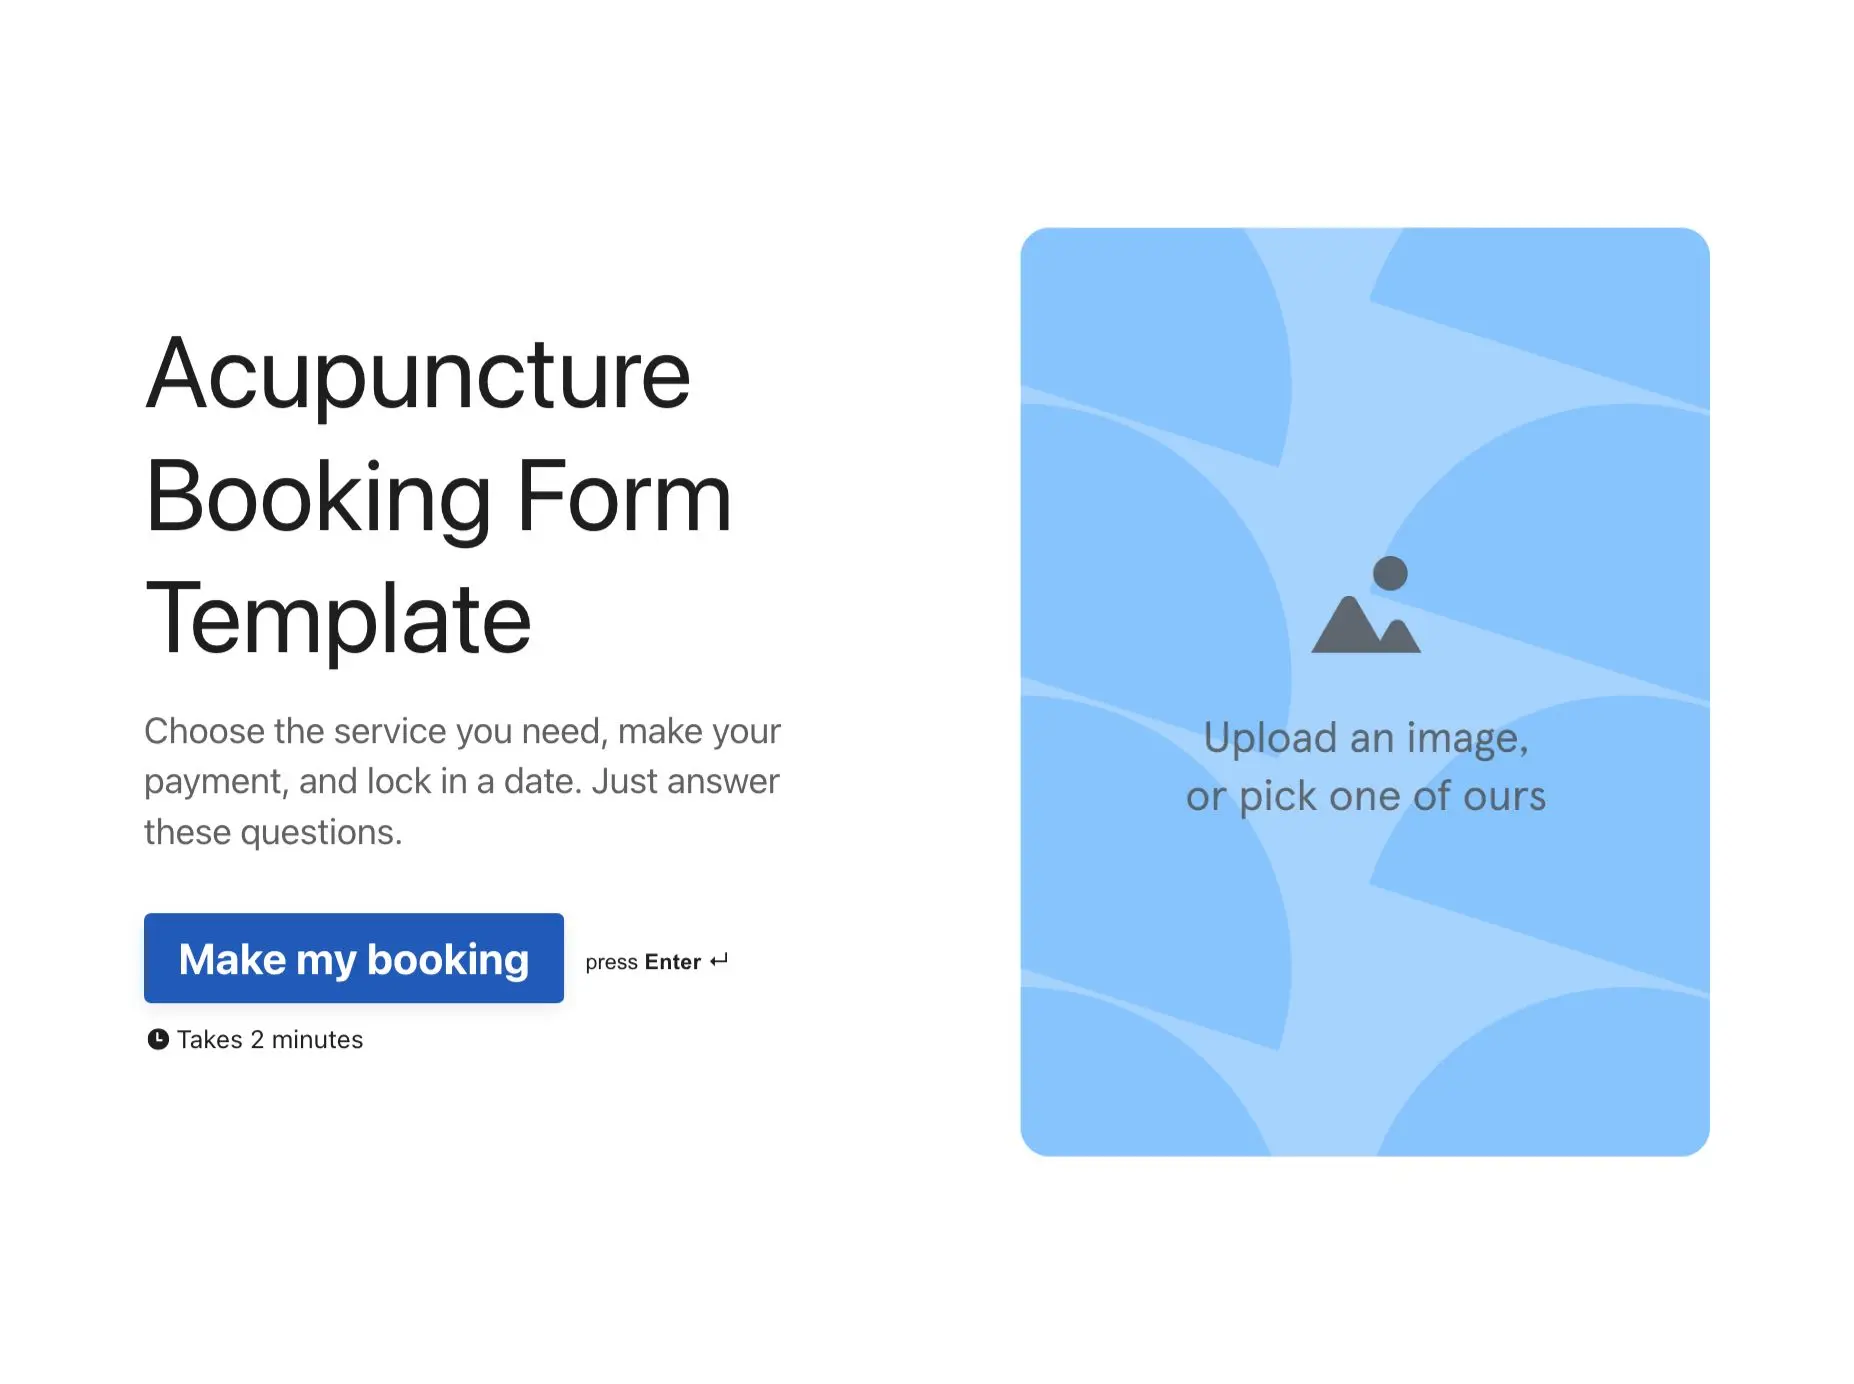 Acupuncture Booking Form Template Hero